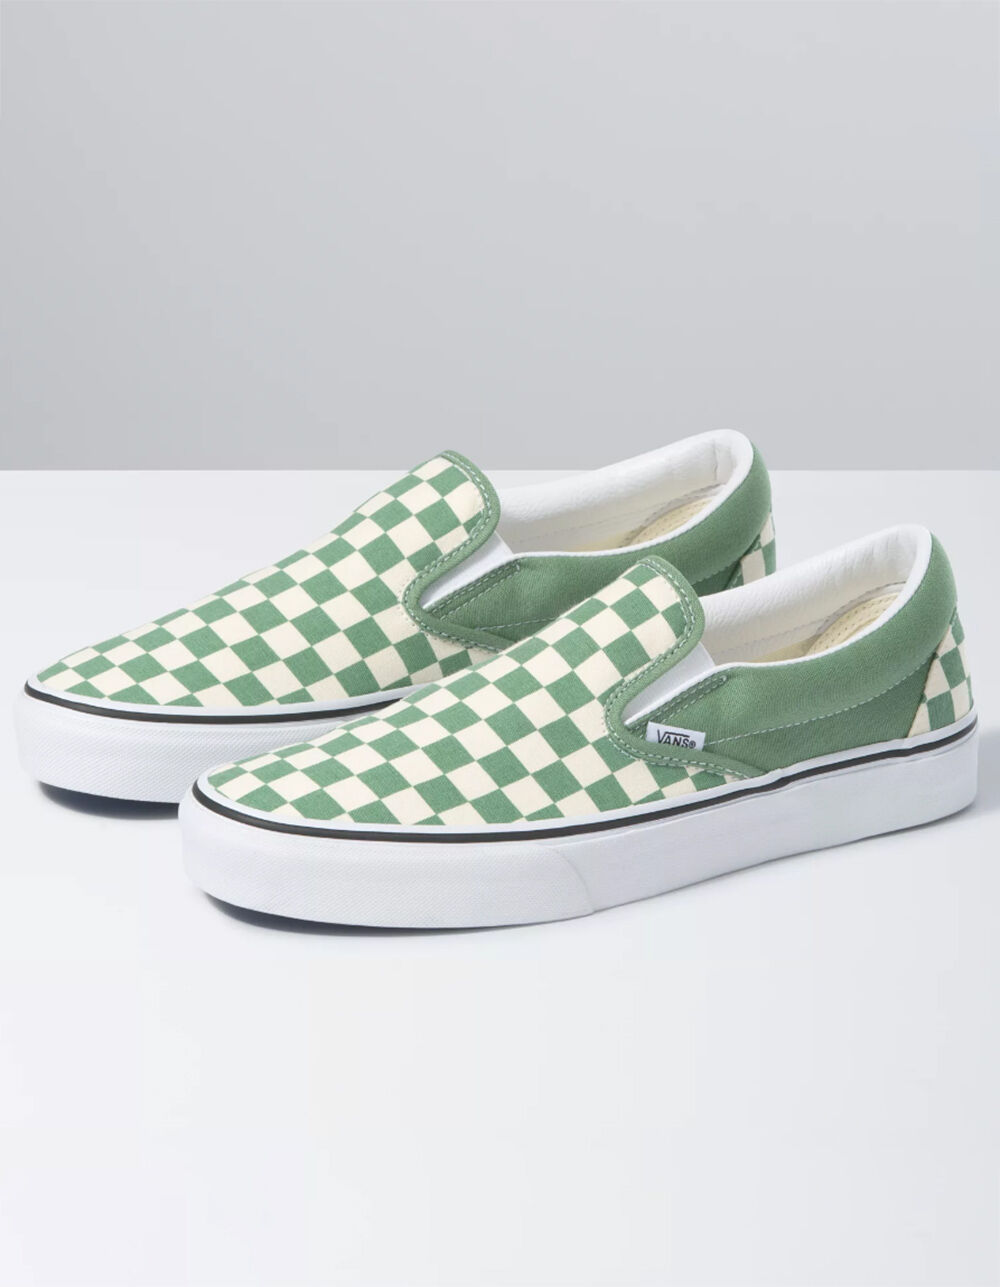 VANS Checkboard Classic Slip-On Shoes - CHECKERBOARD | Tillys